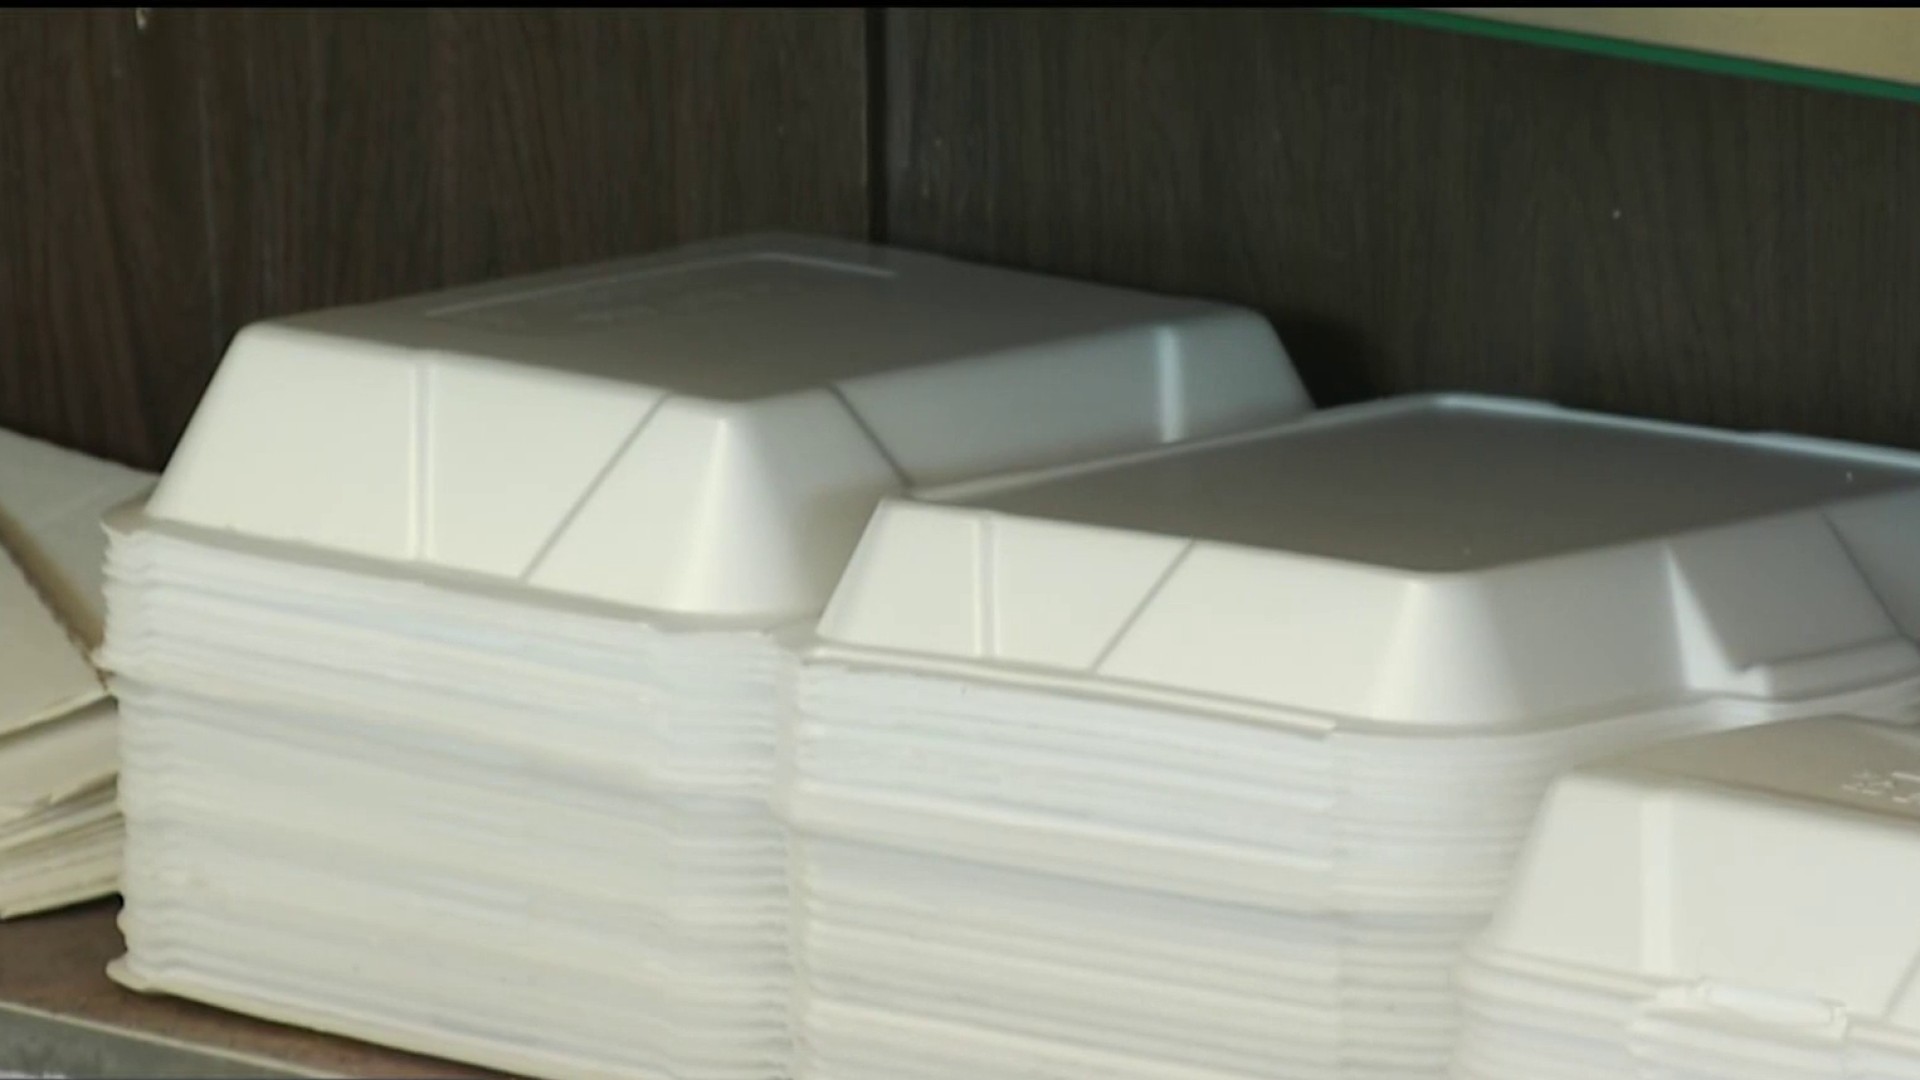 Styrofoam is Officially Banned in the City of San Diego – NBC 7 San Diego